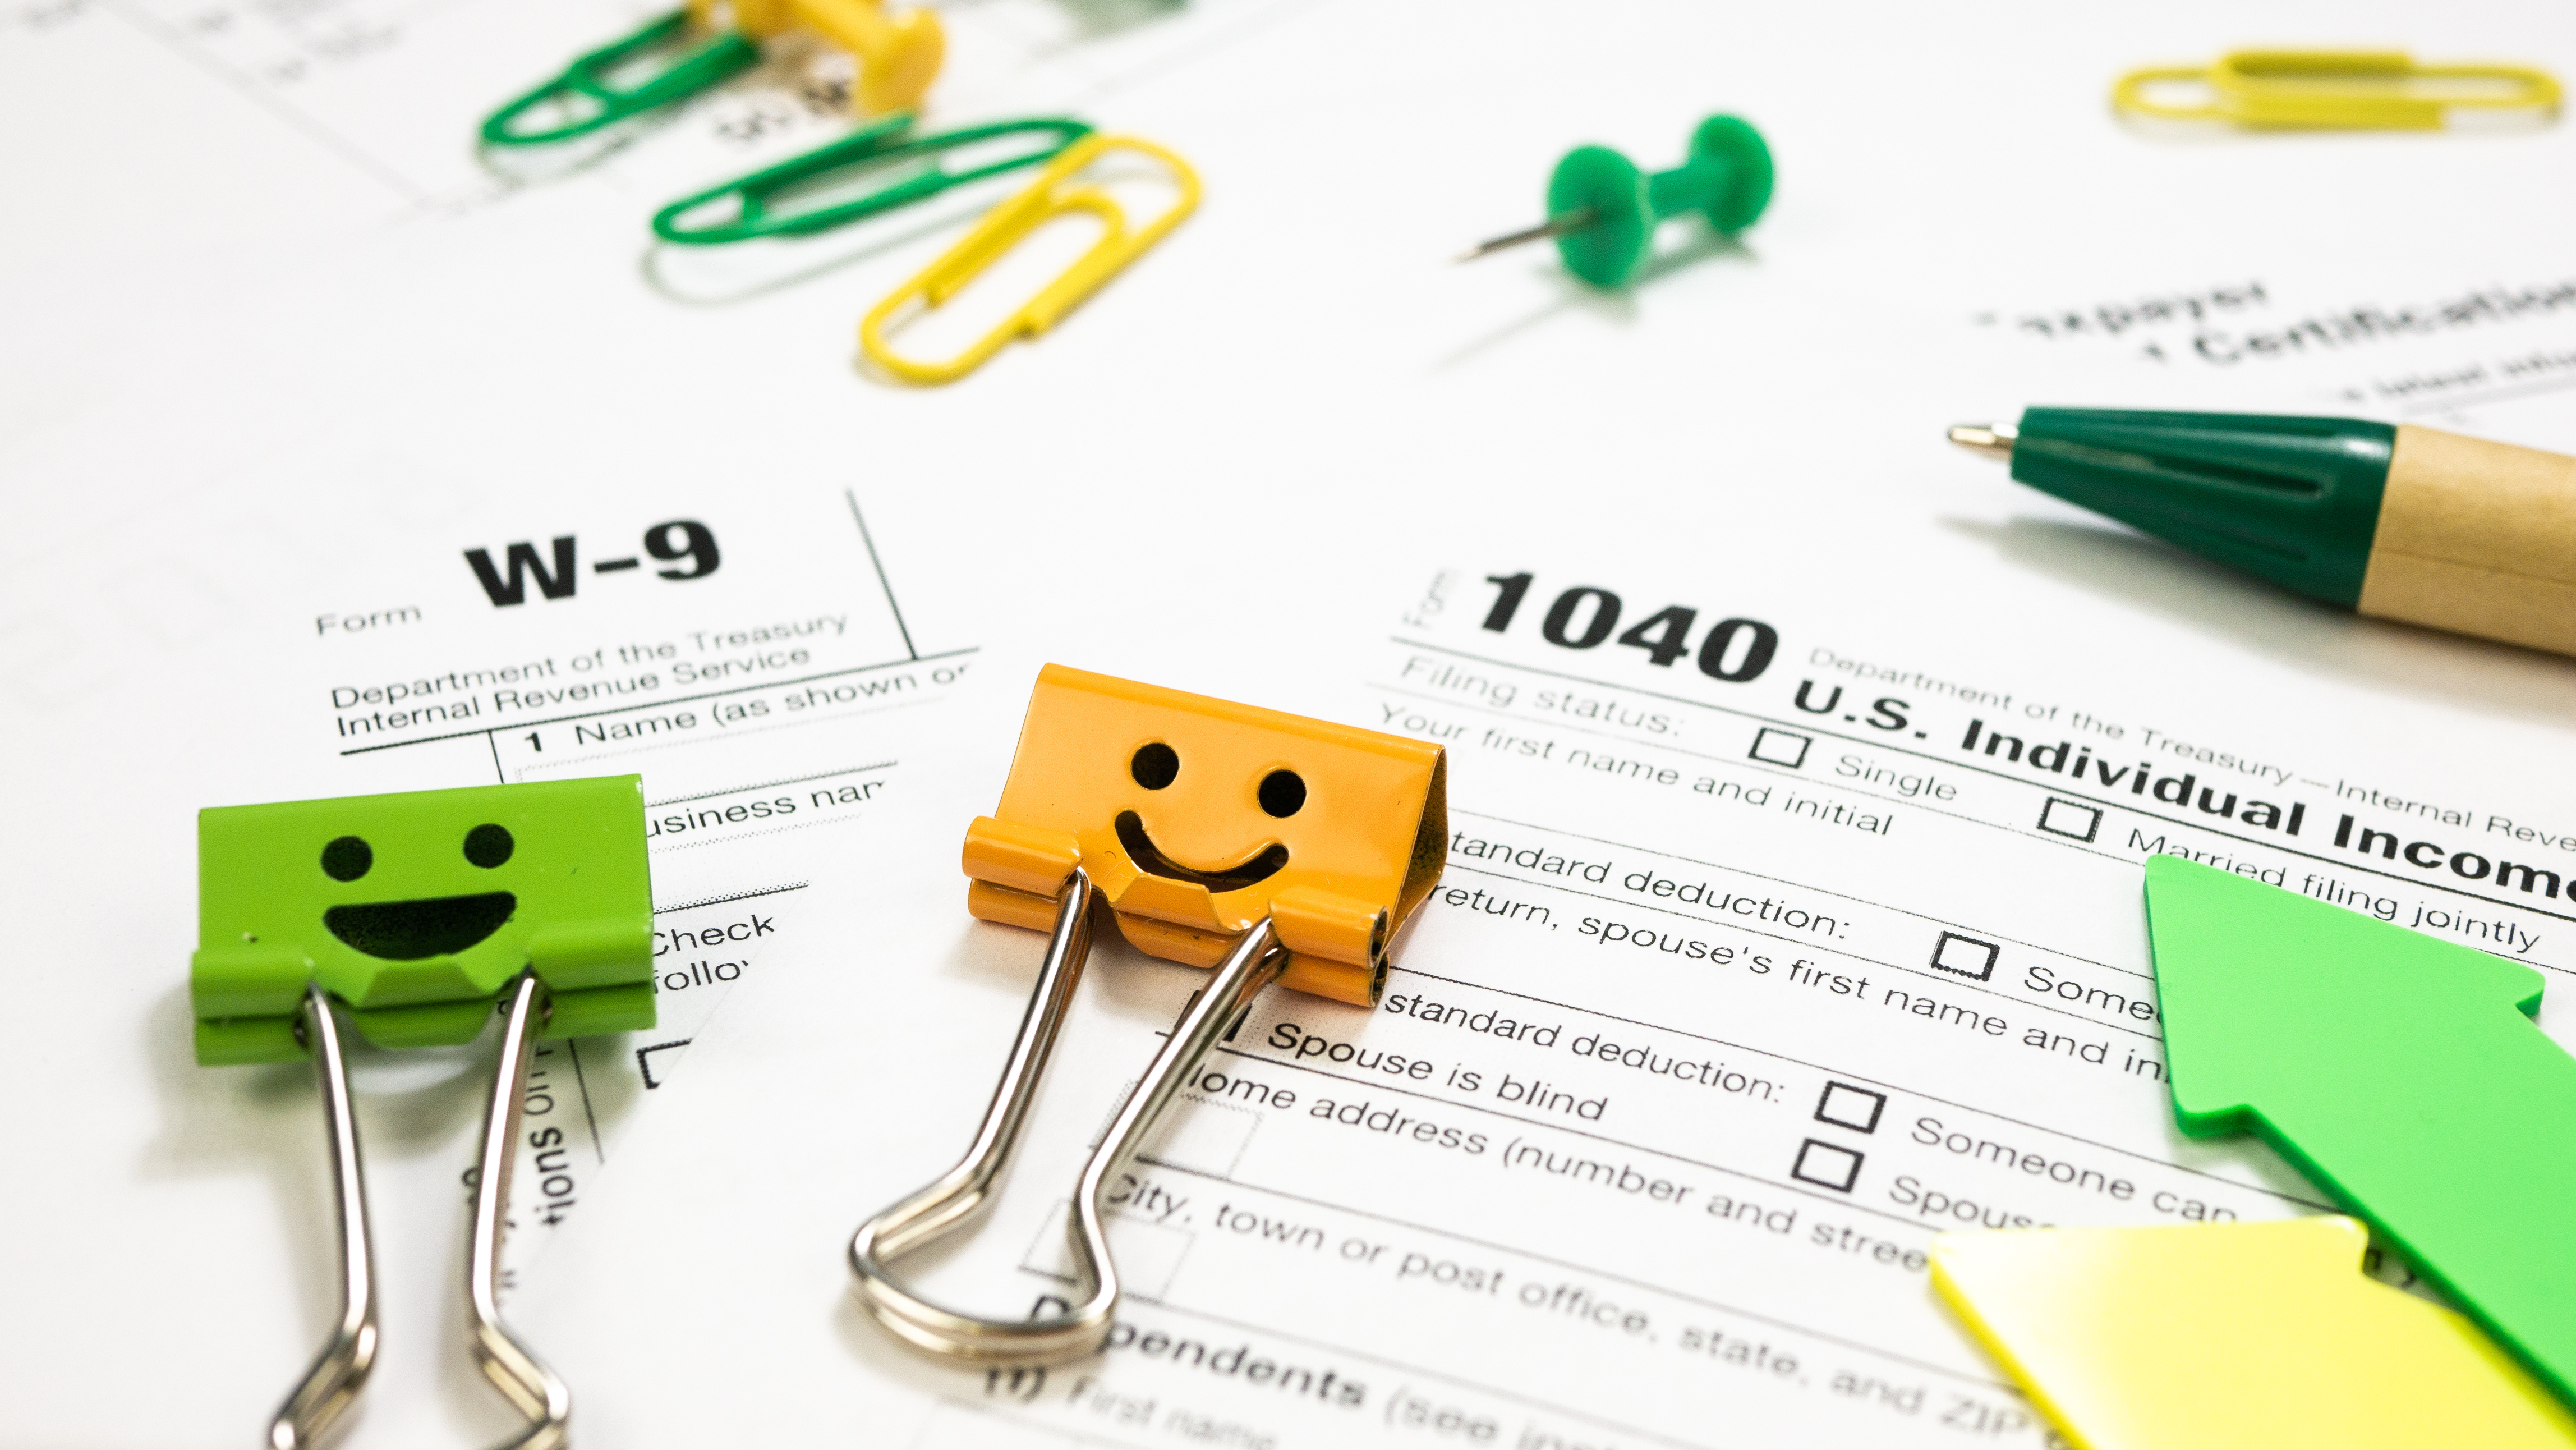 Smile Binder Clips with 1040 Tax Form and W-9